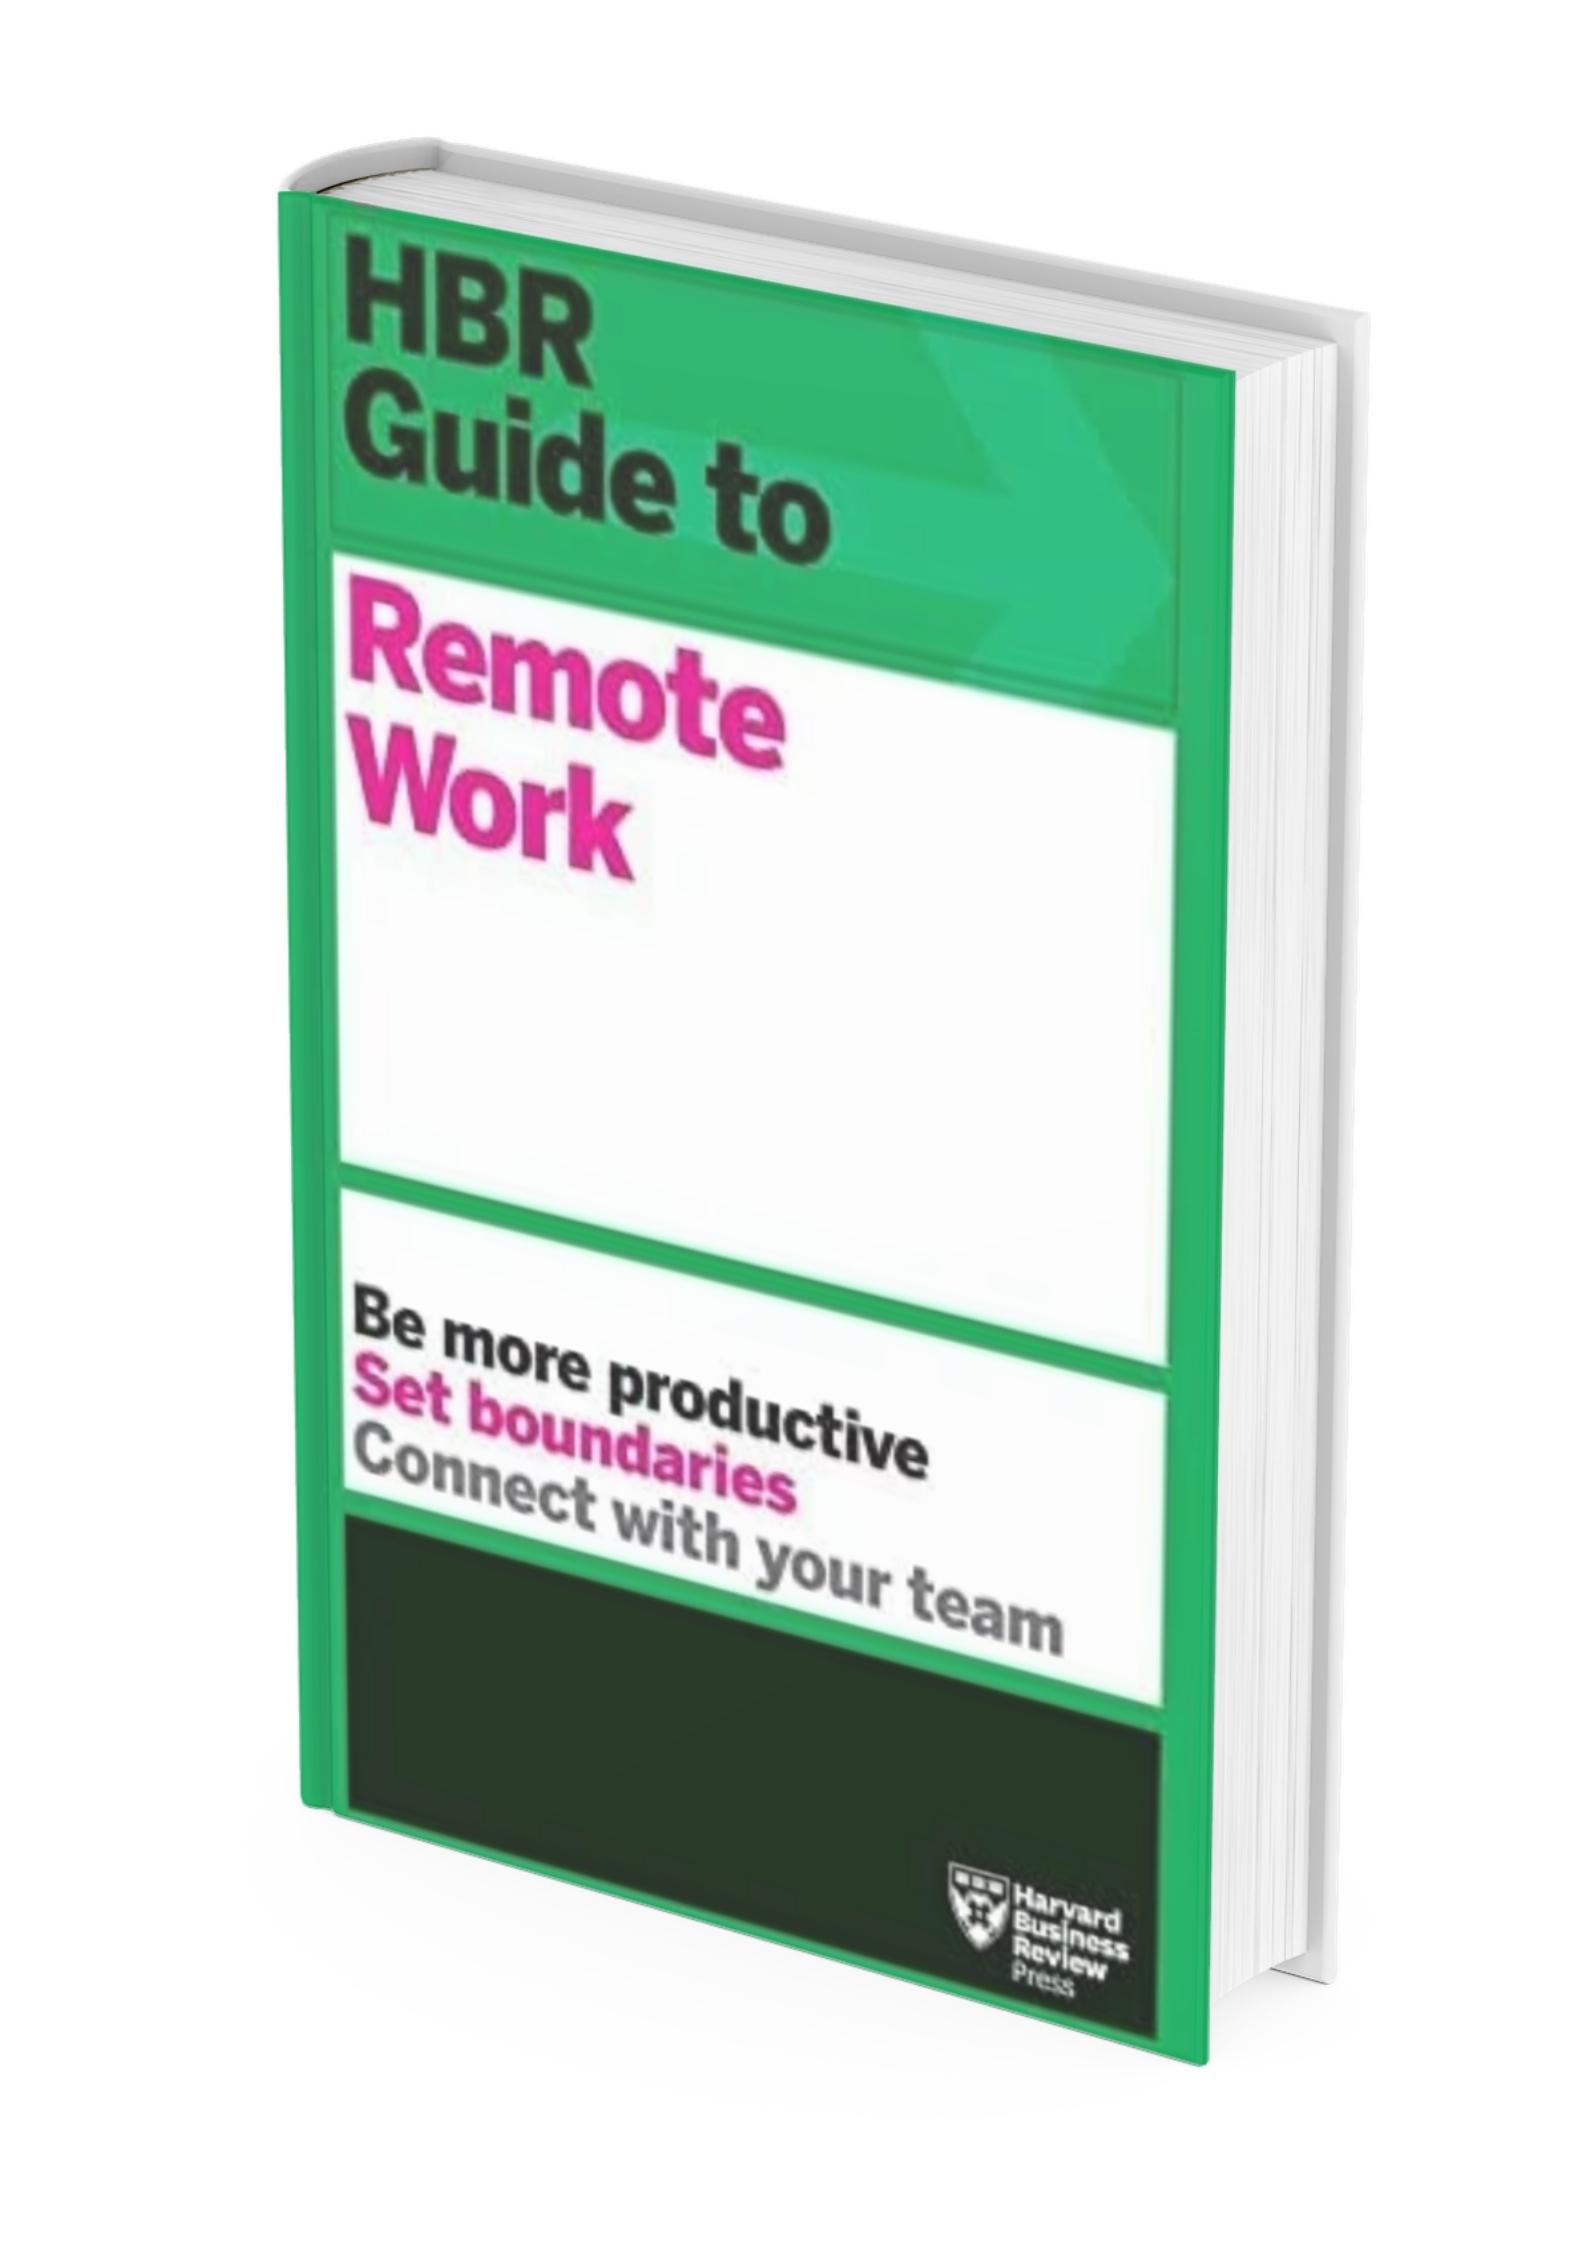 HBR Guide to Remote work